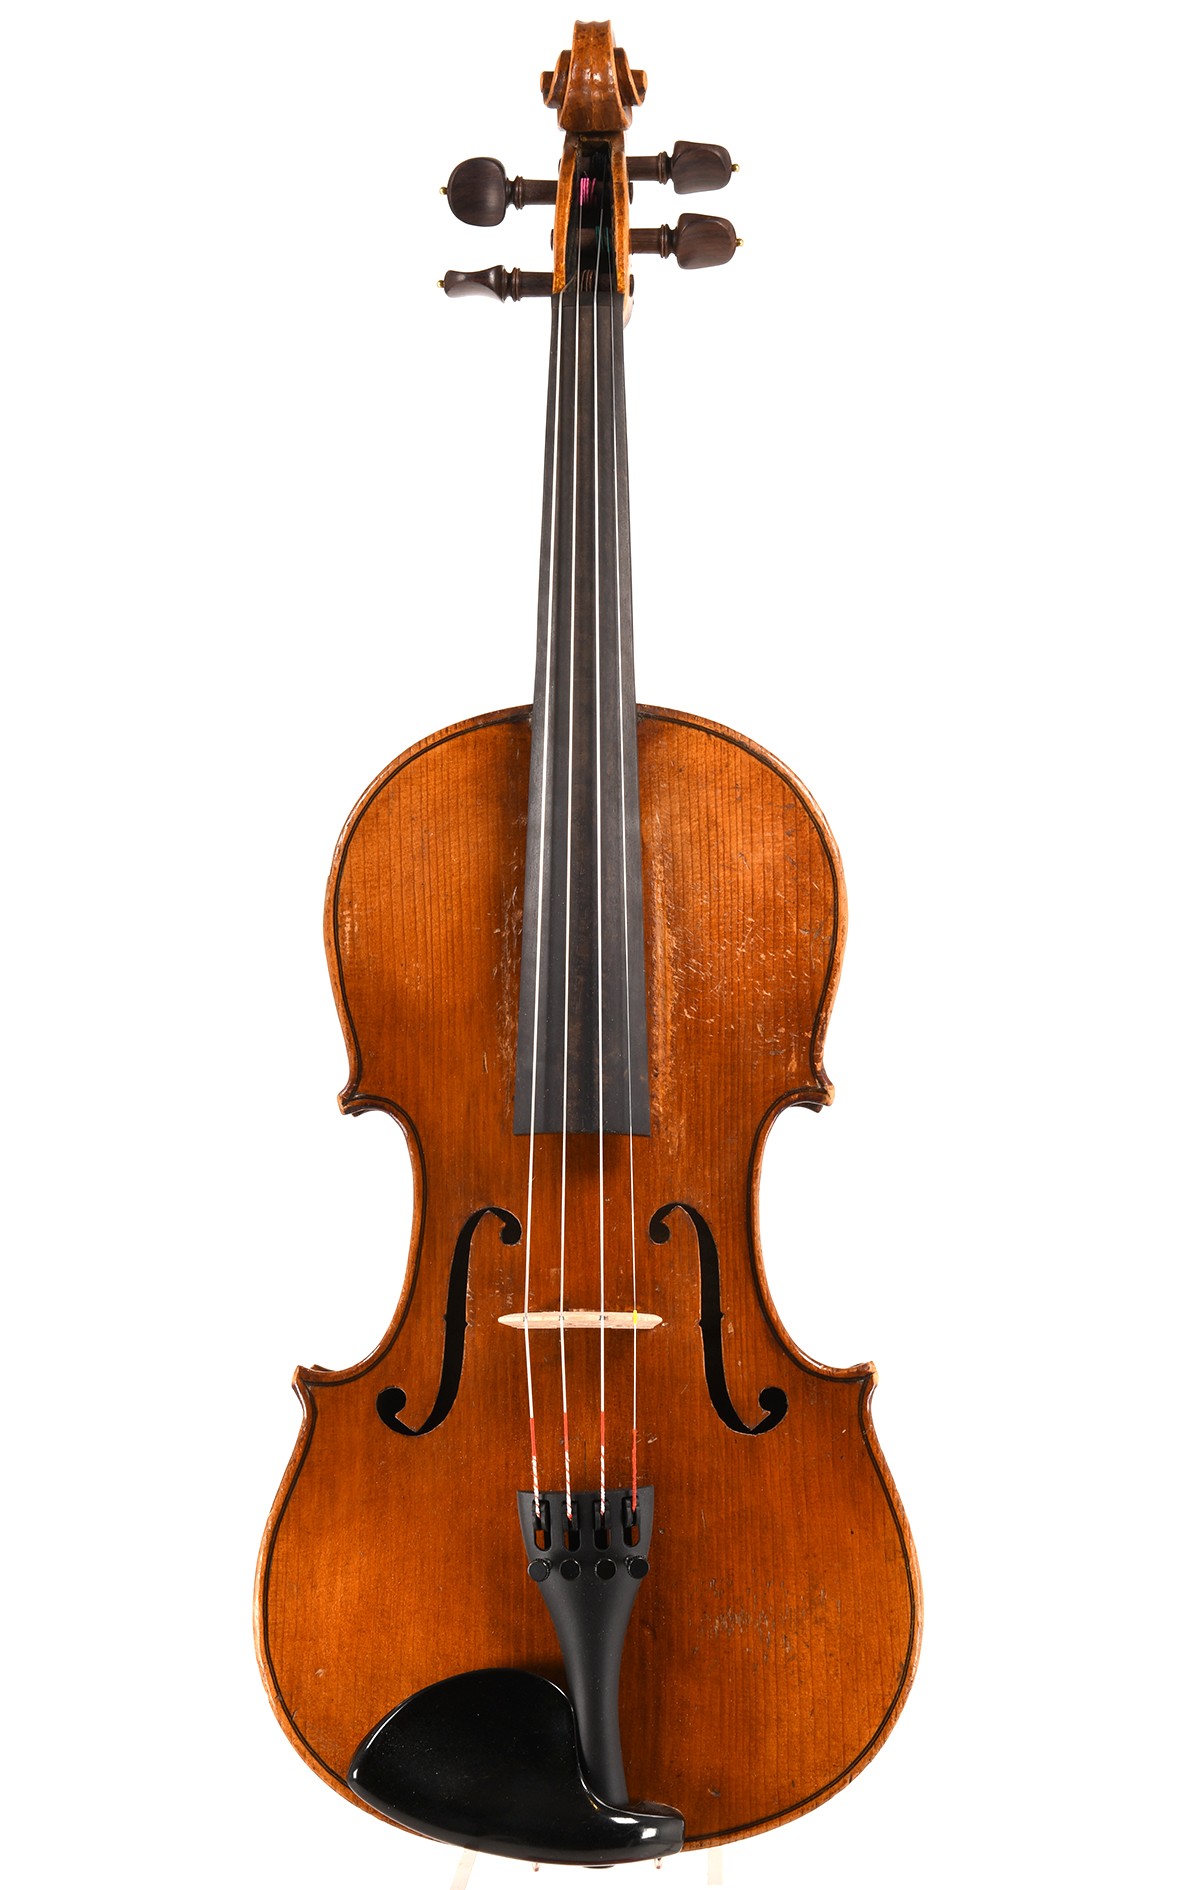 Antique violin from Saxony. Made in the 1920's